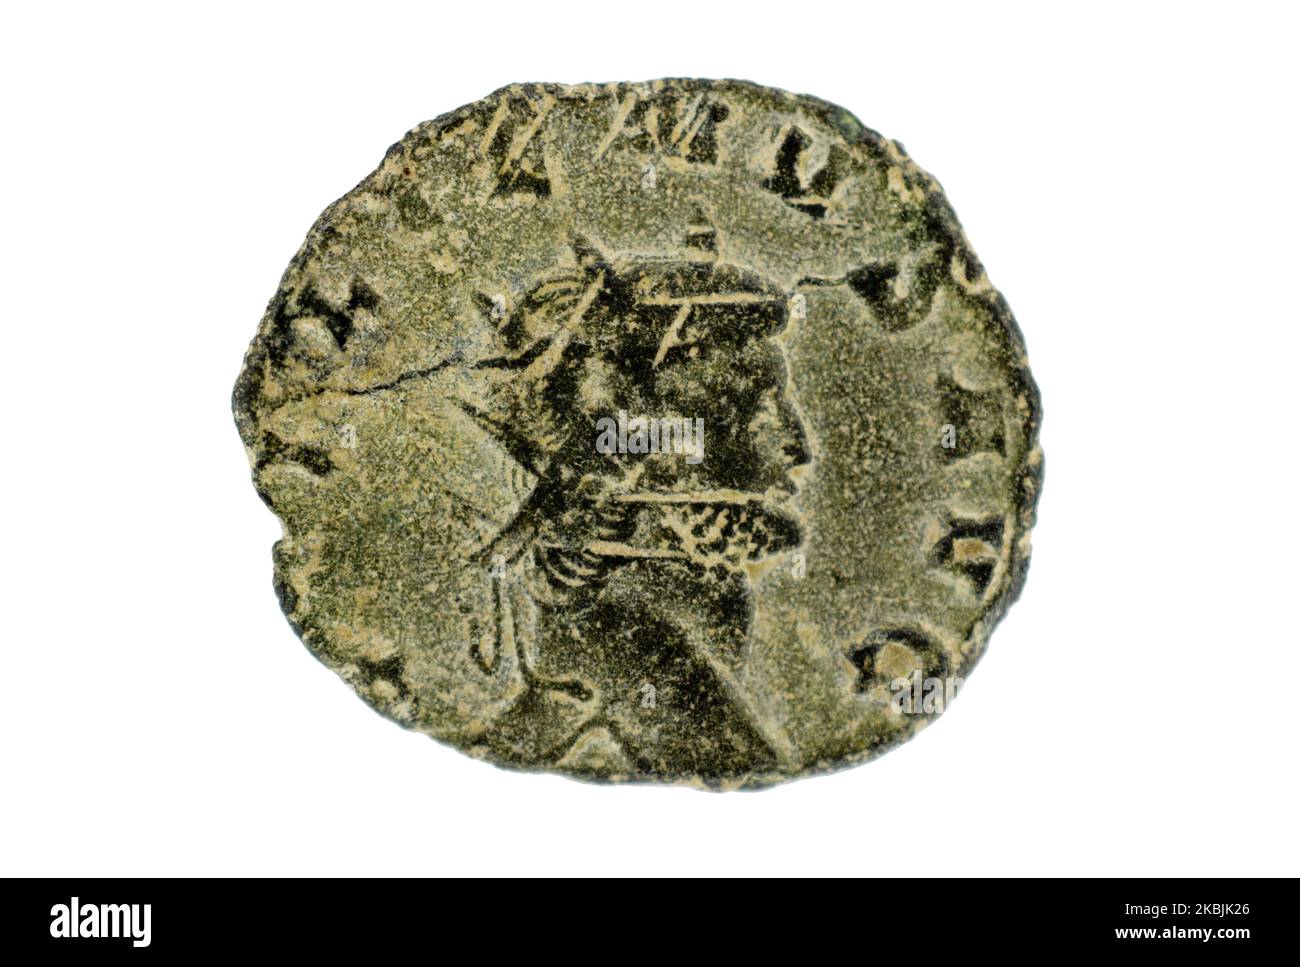 The obverse of a Roman coin, an antoninianus showing Aurelian (c. 270-275 AD). Stock Photo